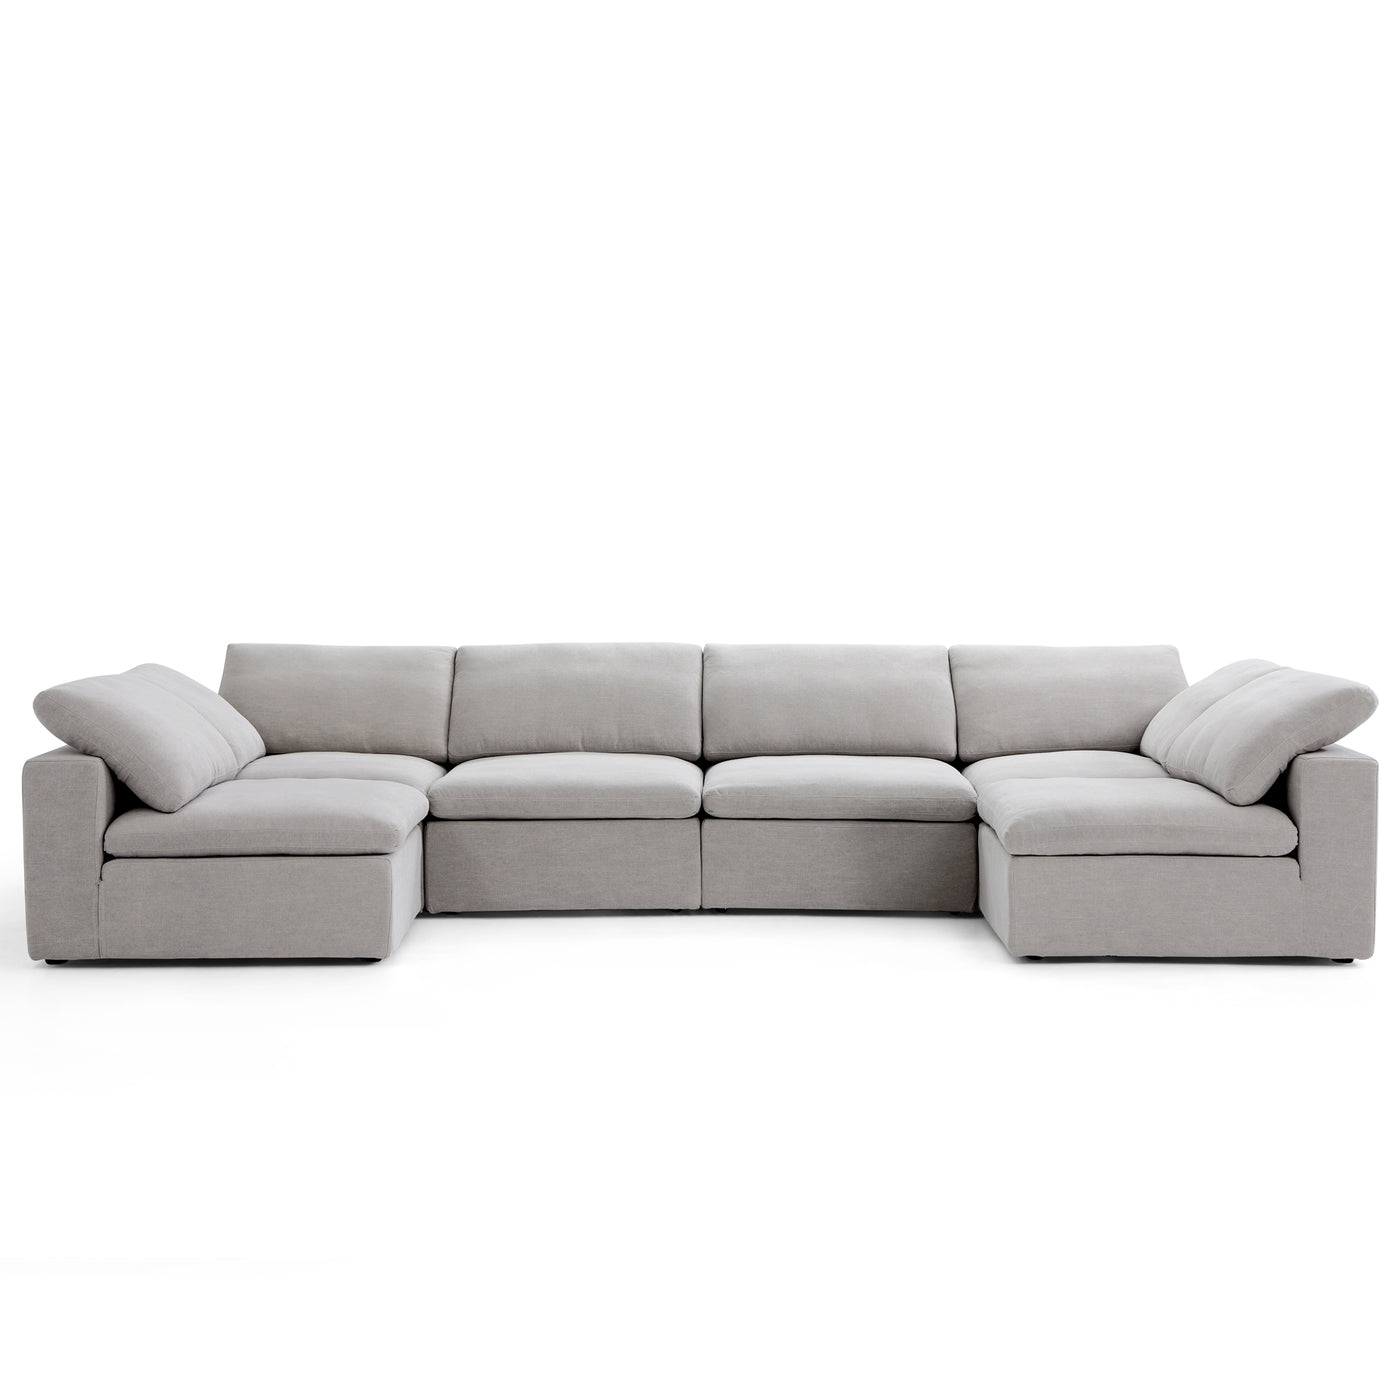 Tender Wabi Sabi Sand U Shaped Sectional with Open Ends-Gray-165.4"